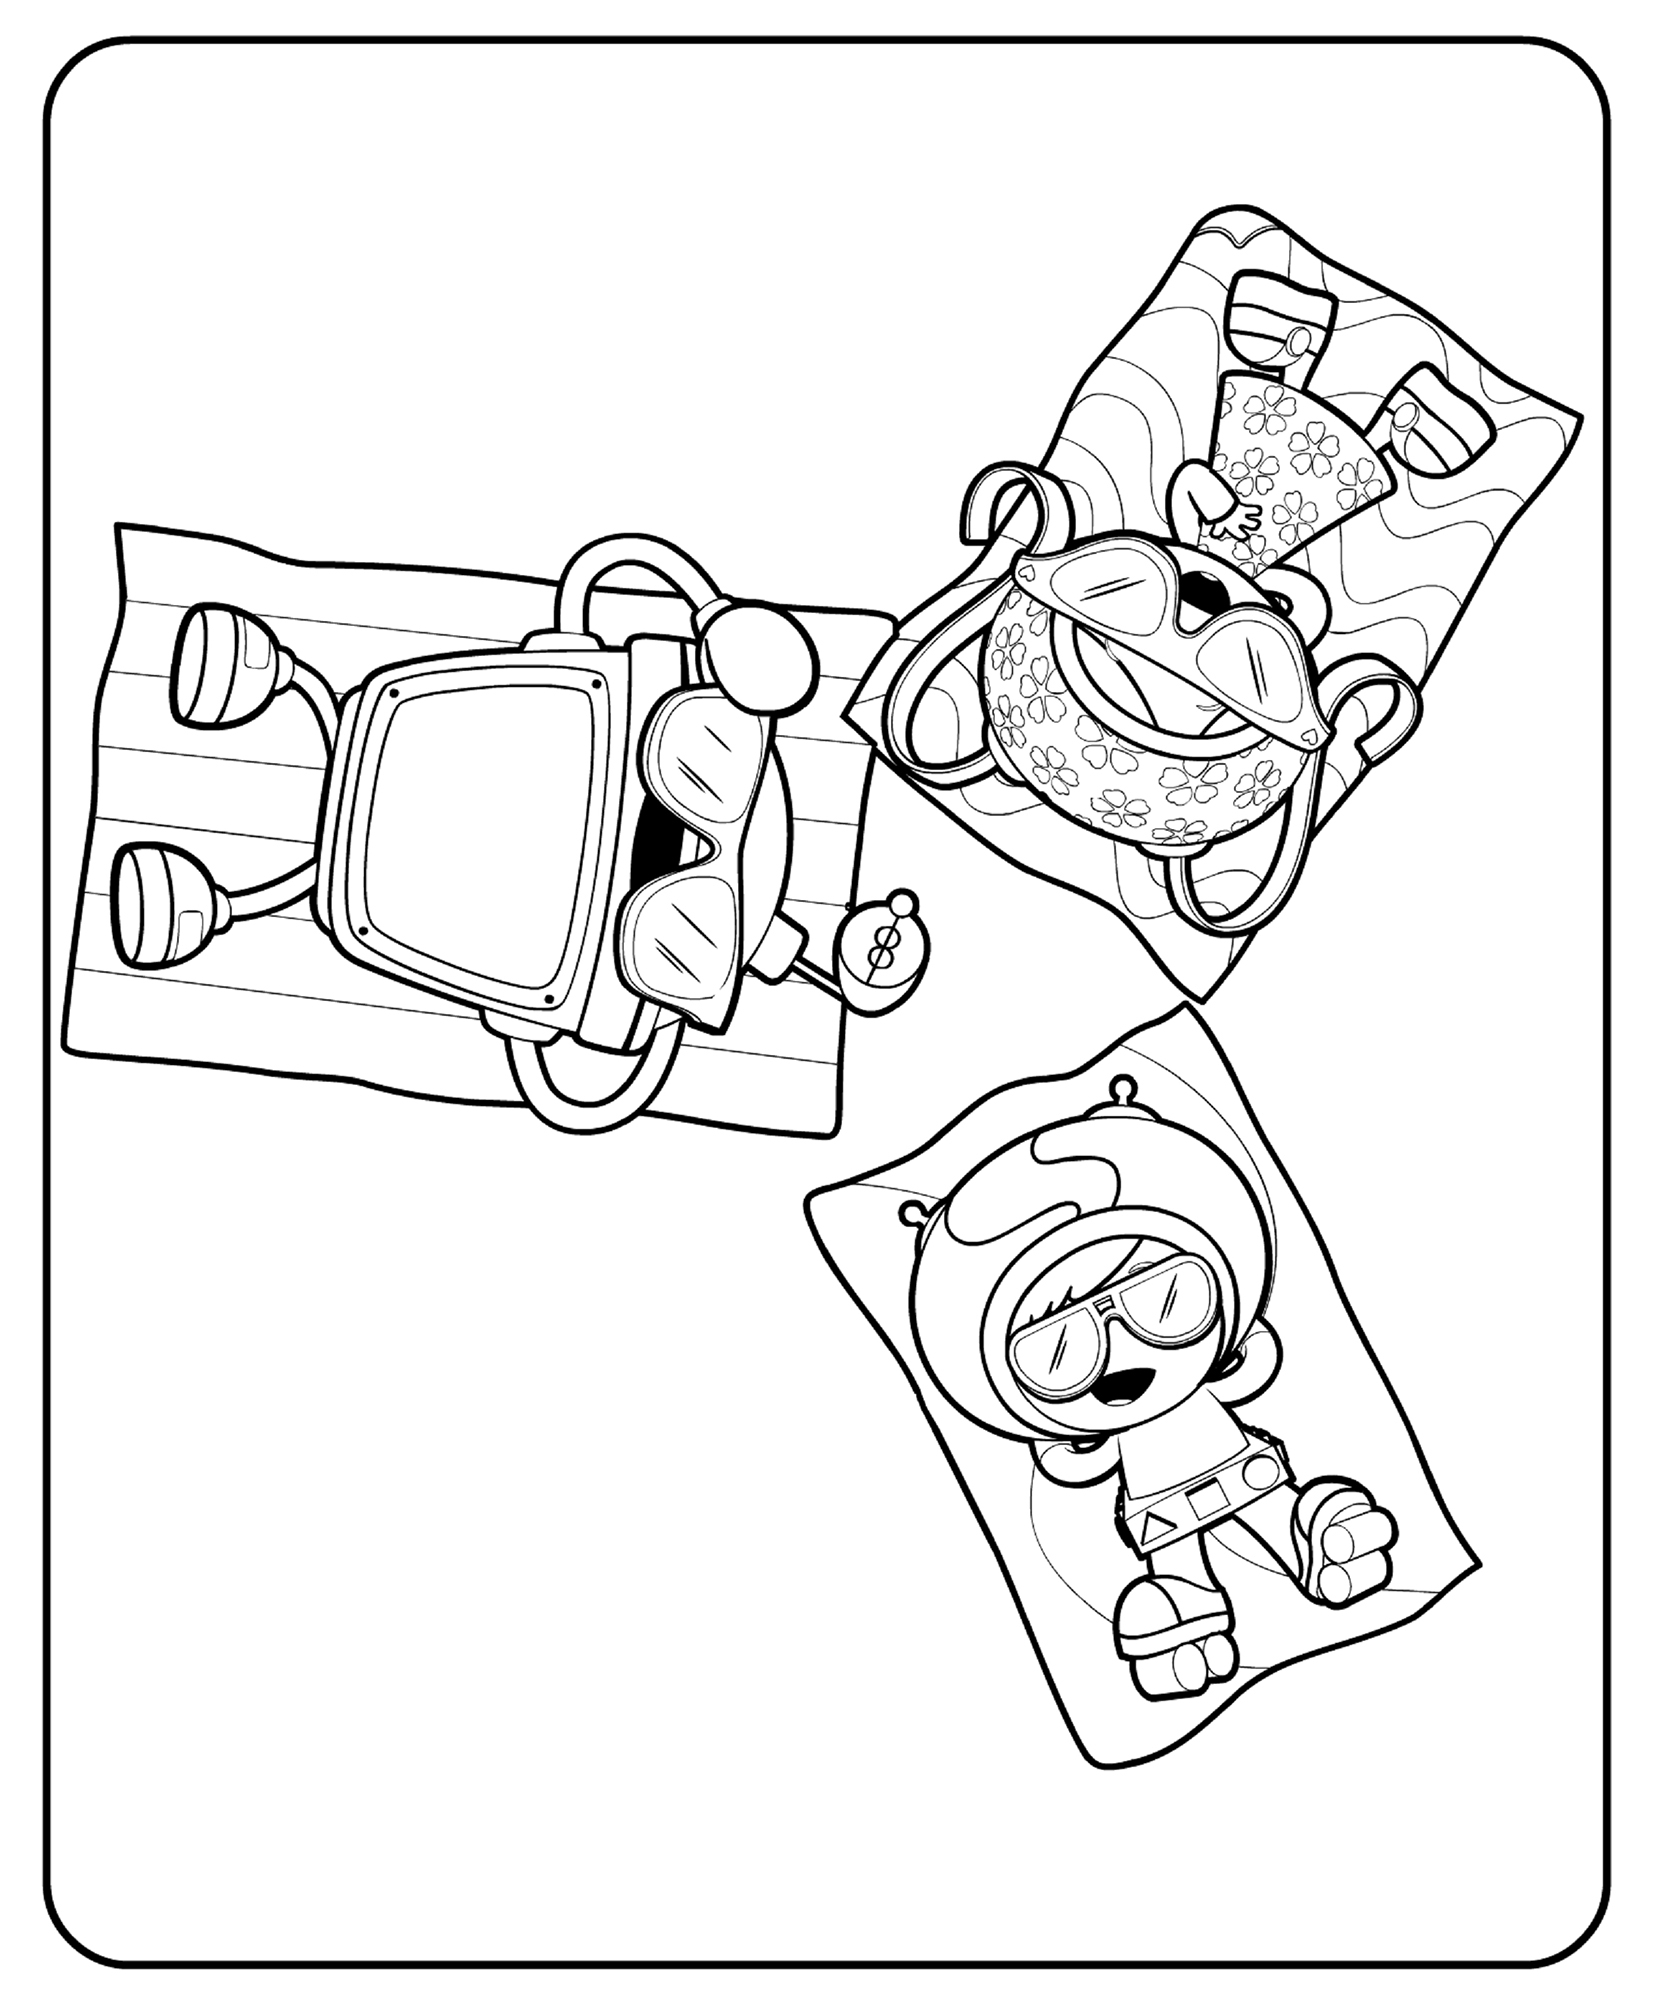 coloring pages of team umizoomi